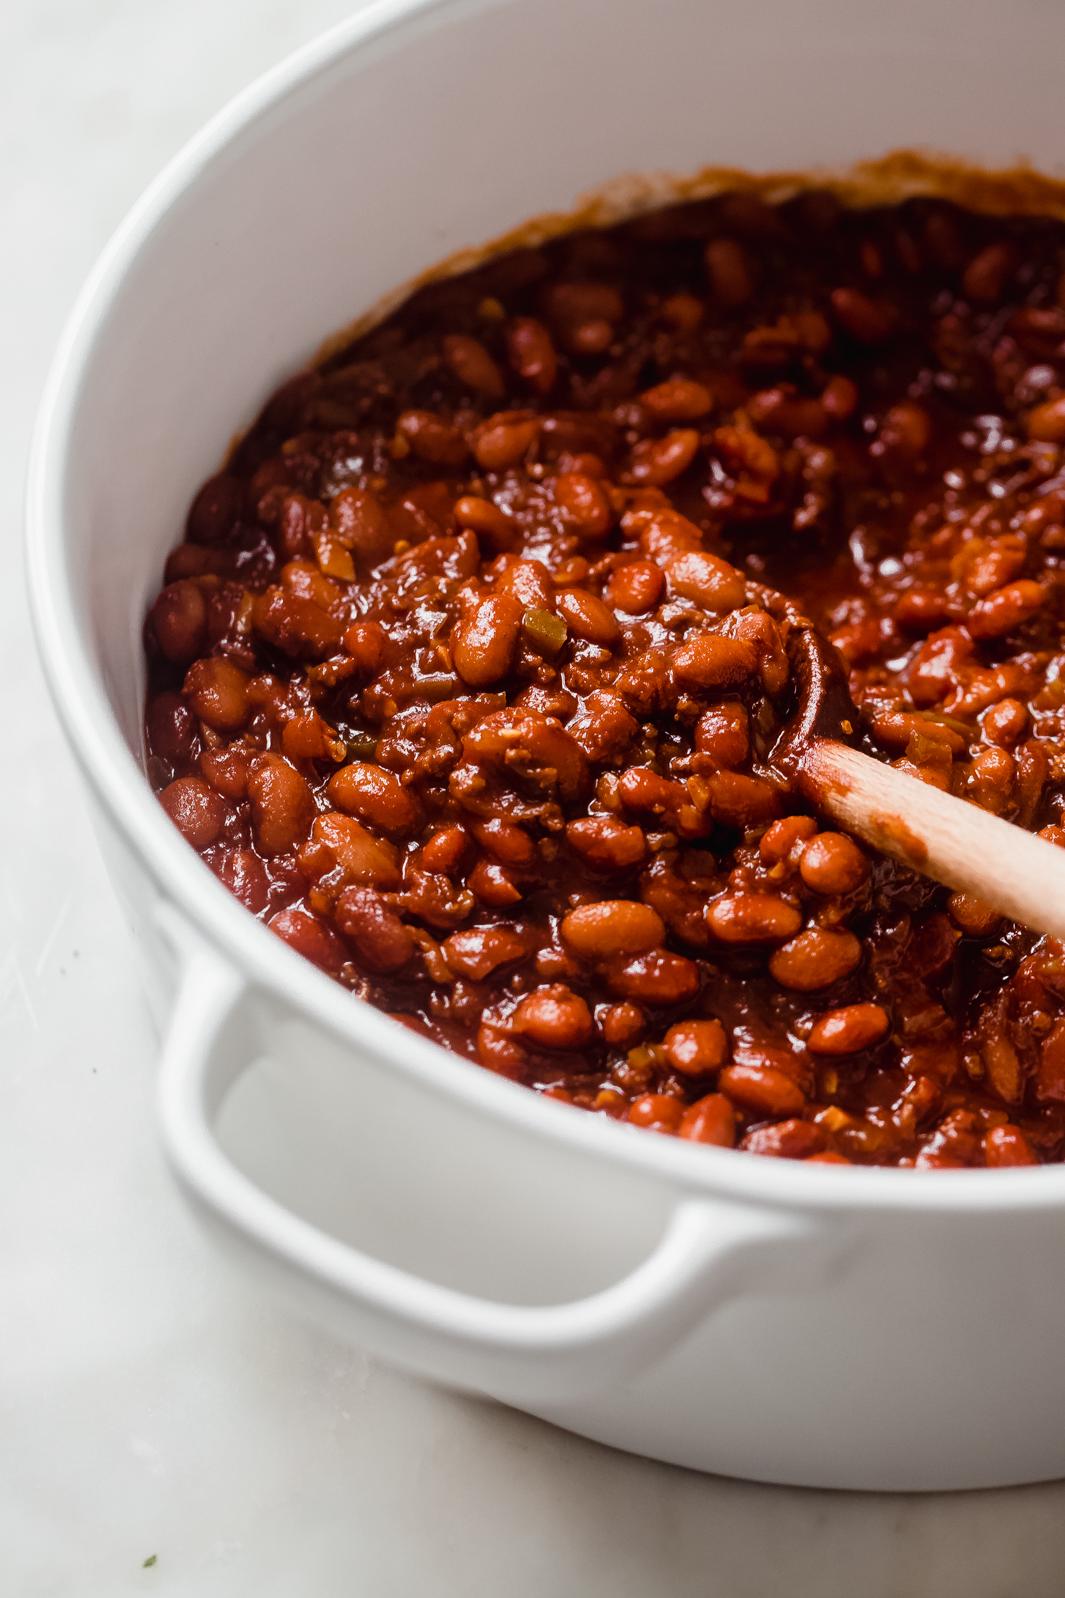  These baked beans strike the perfect balance between sweet and tangy.